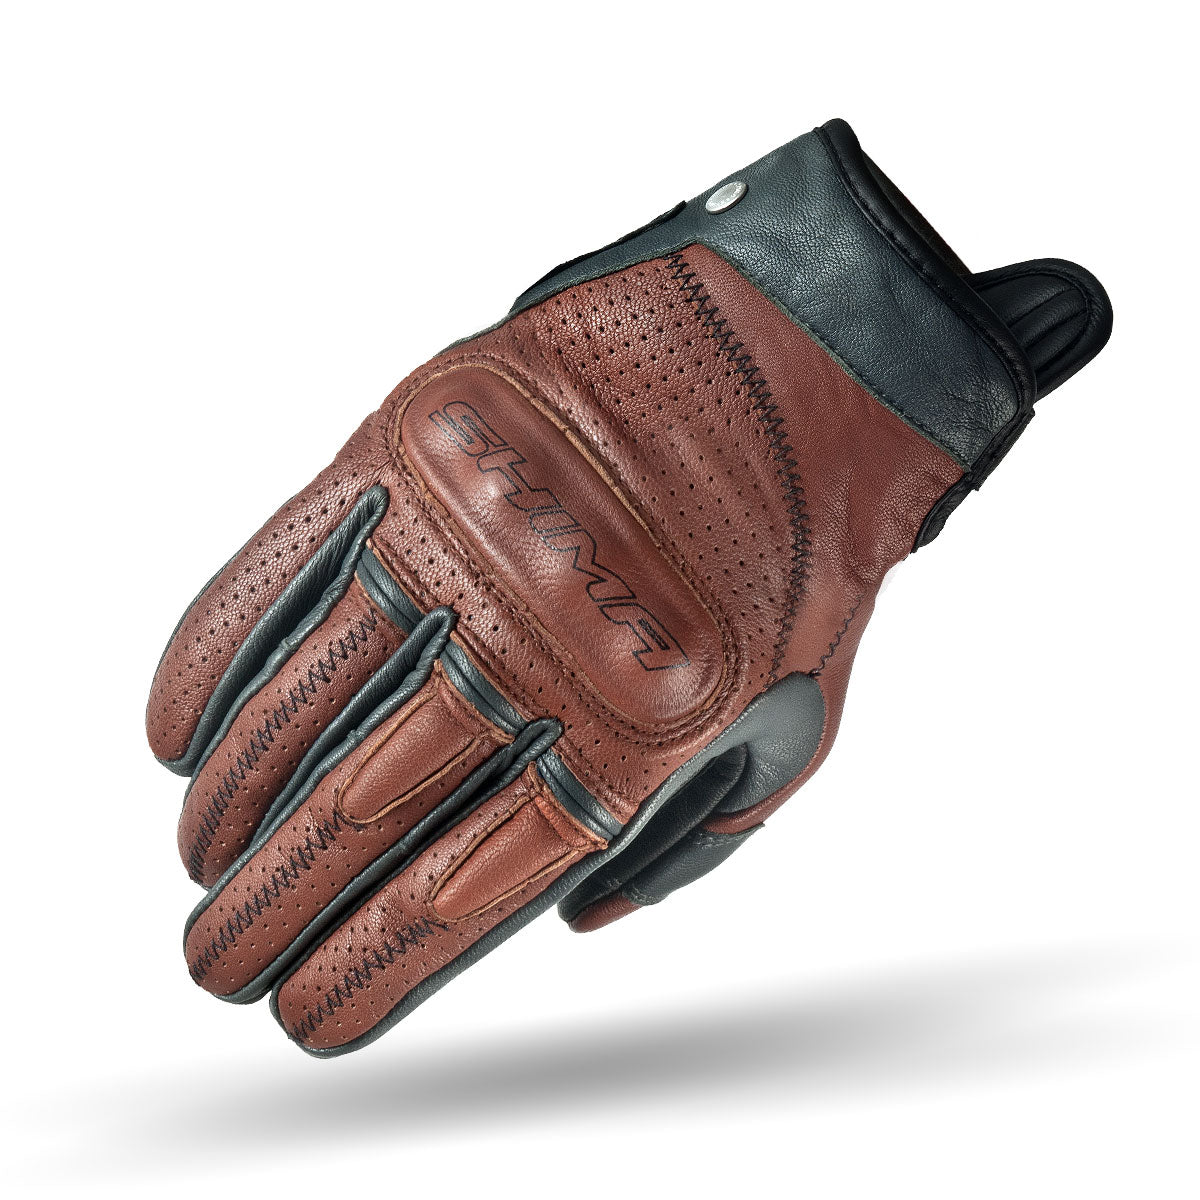 Caliber brown female motorcycle glove from Shima